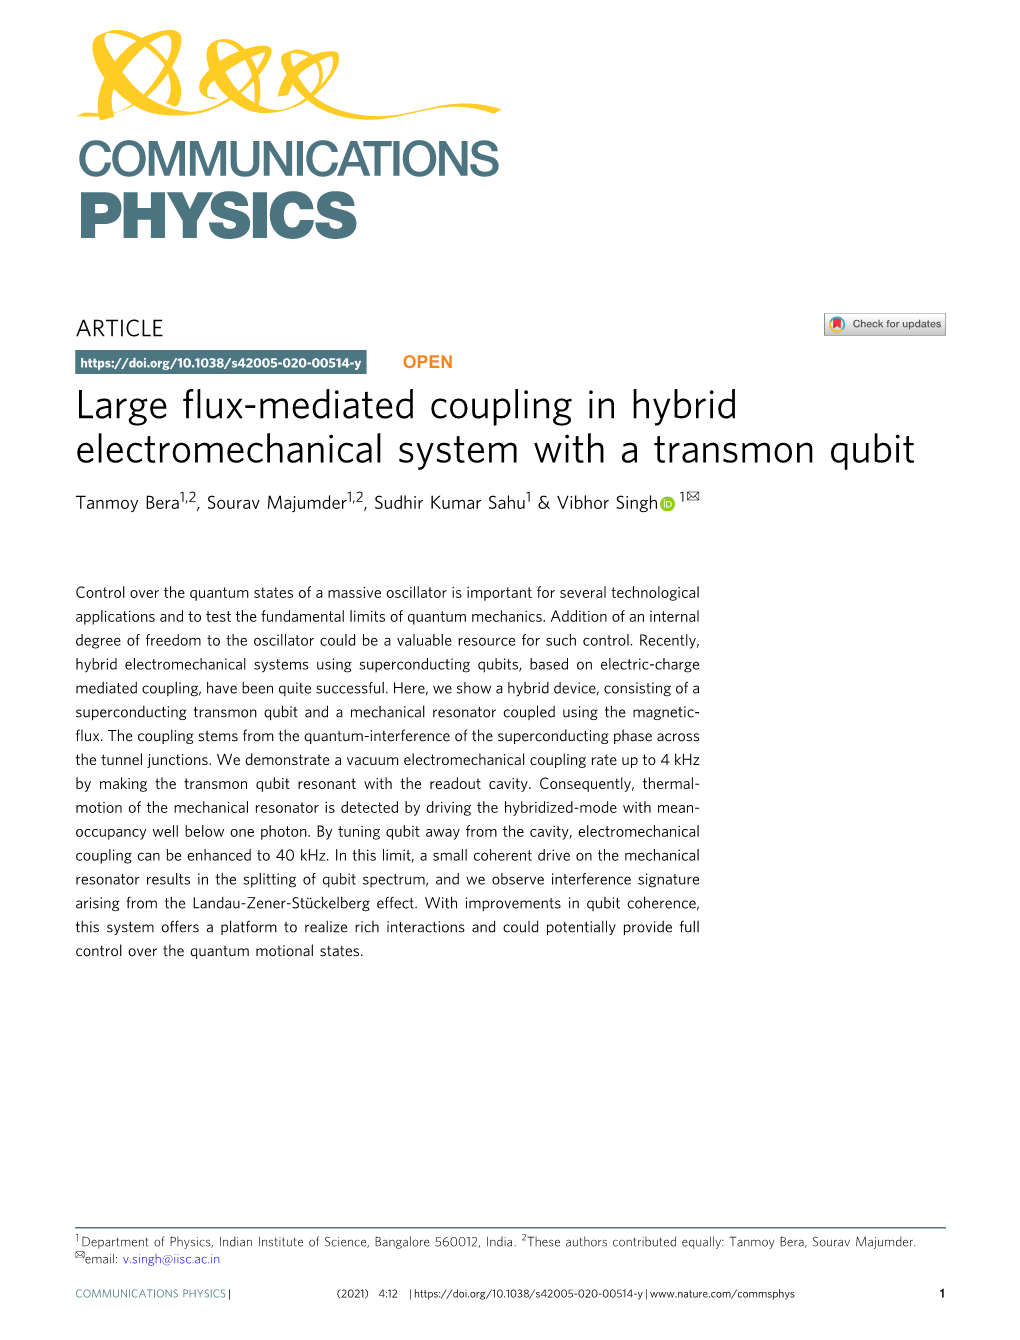 Large Flux-Mediated Coupling in Hybrid Electromechanical System with A